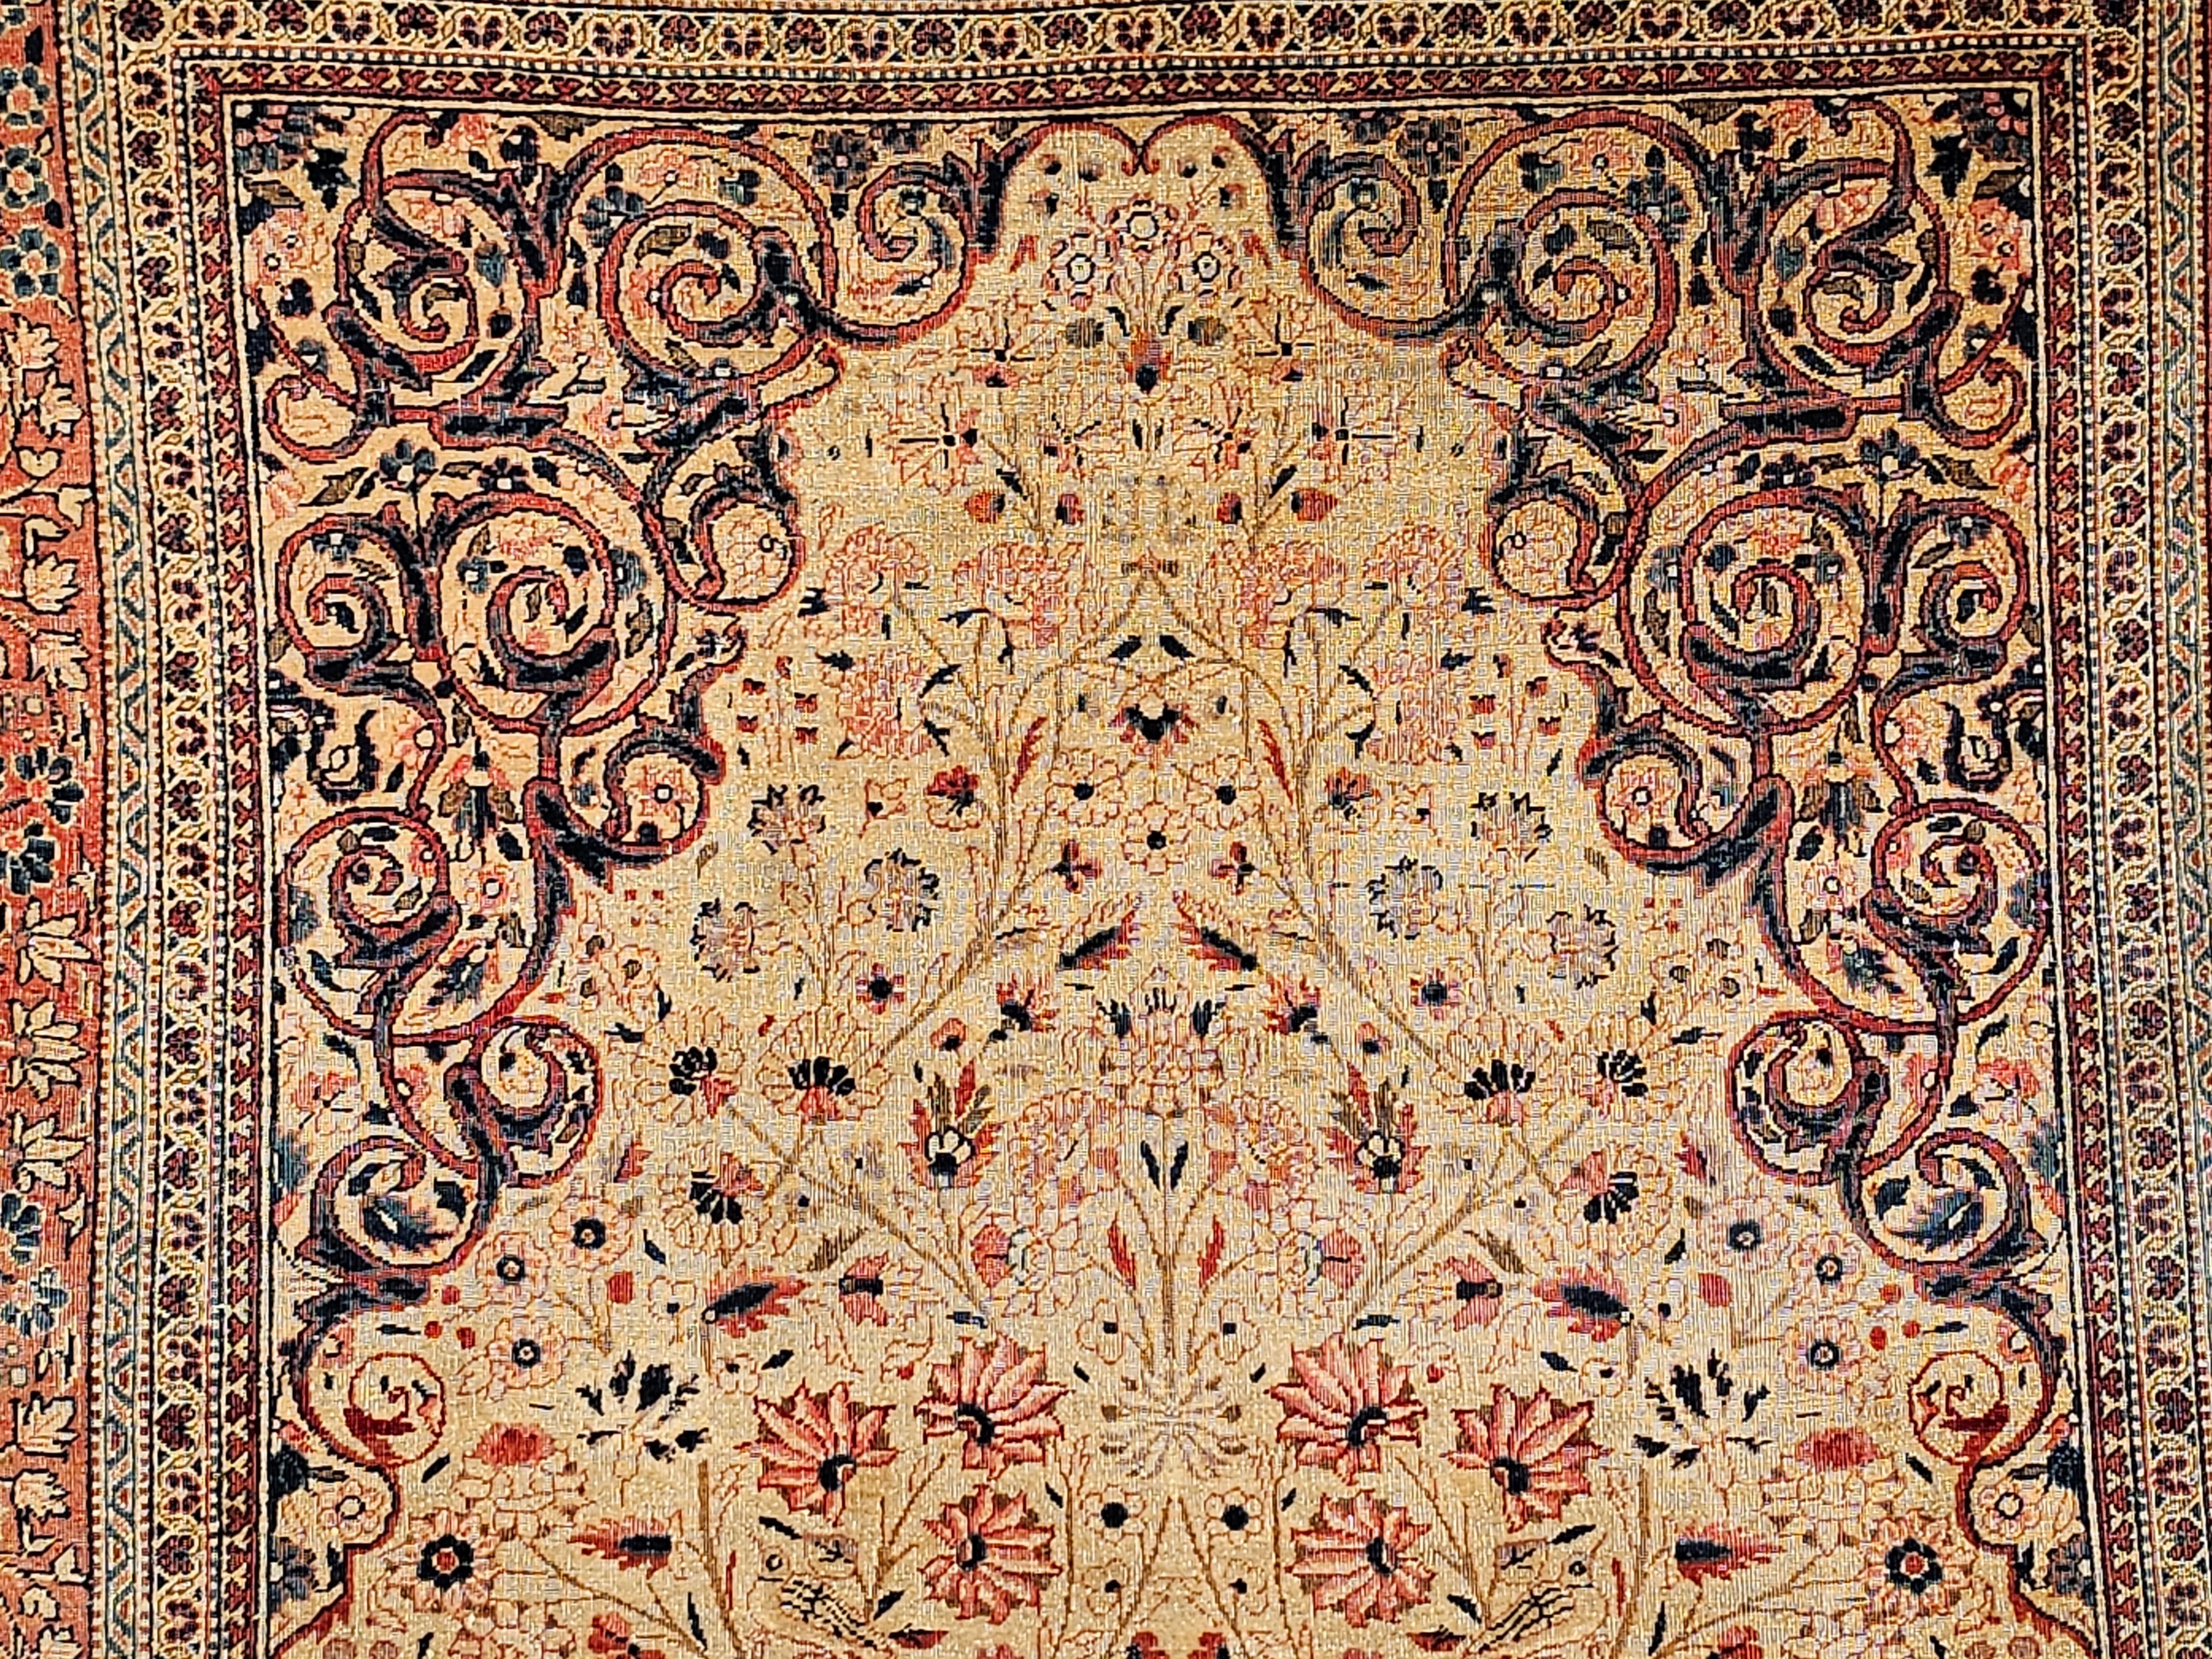 19th Century Persian Kashan Vase “Tree of Life” Rug in Ivory, Brick Red, Navy In Good Condition For Sale In Barrington, IL